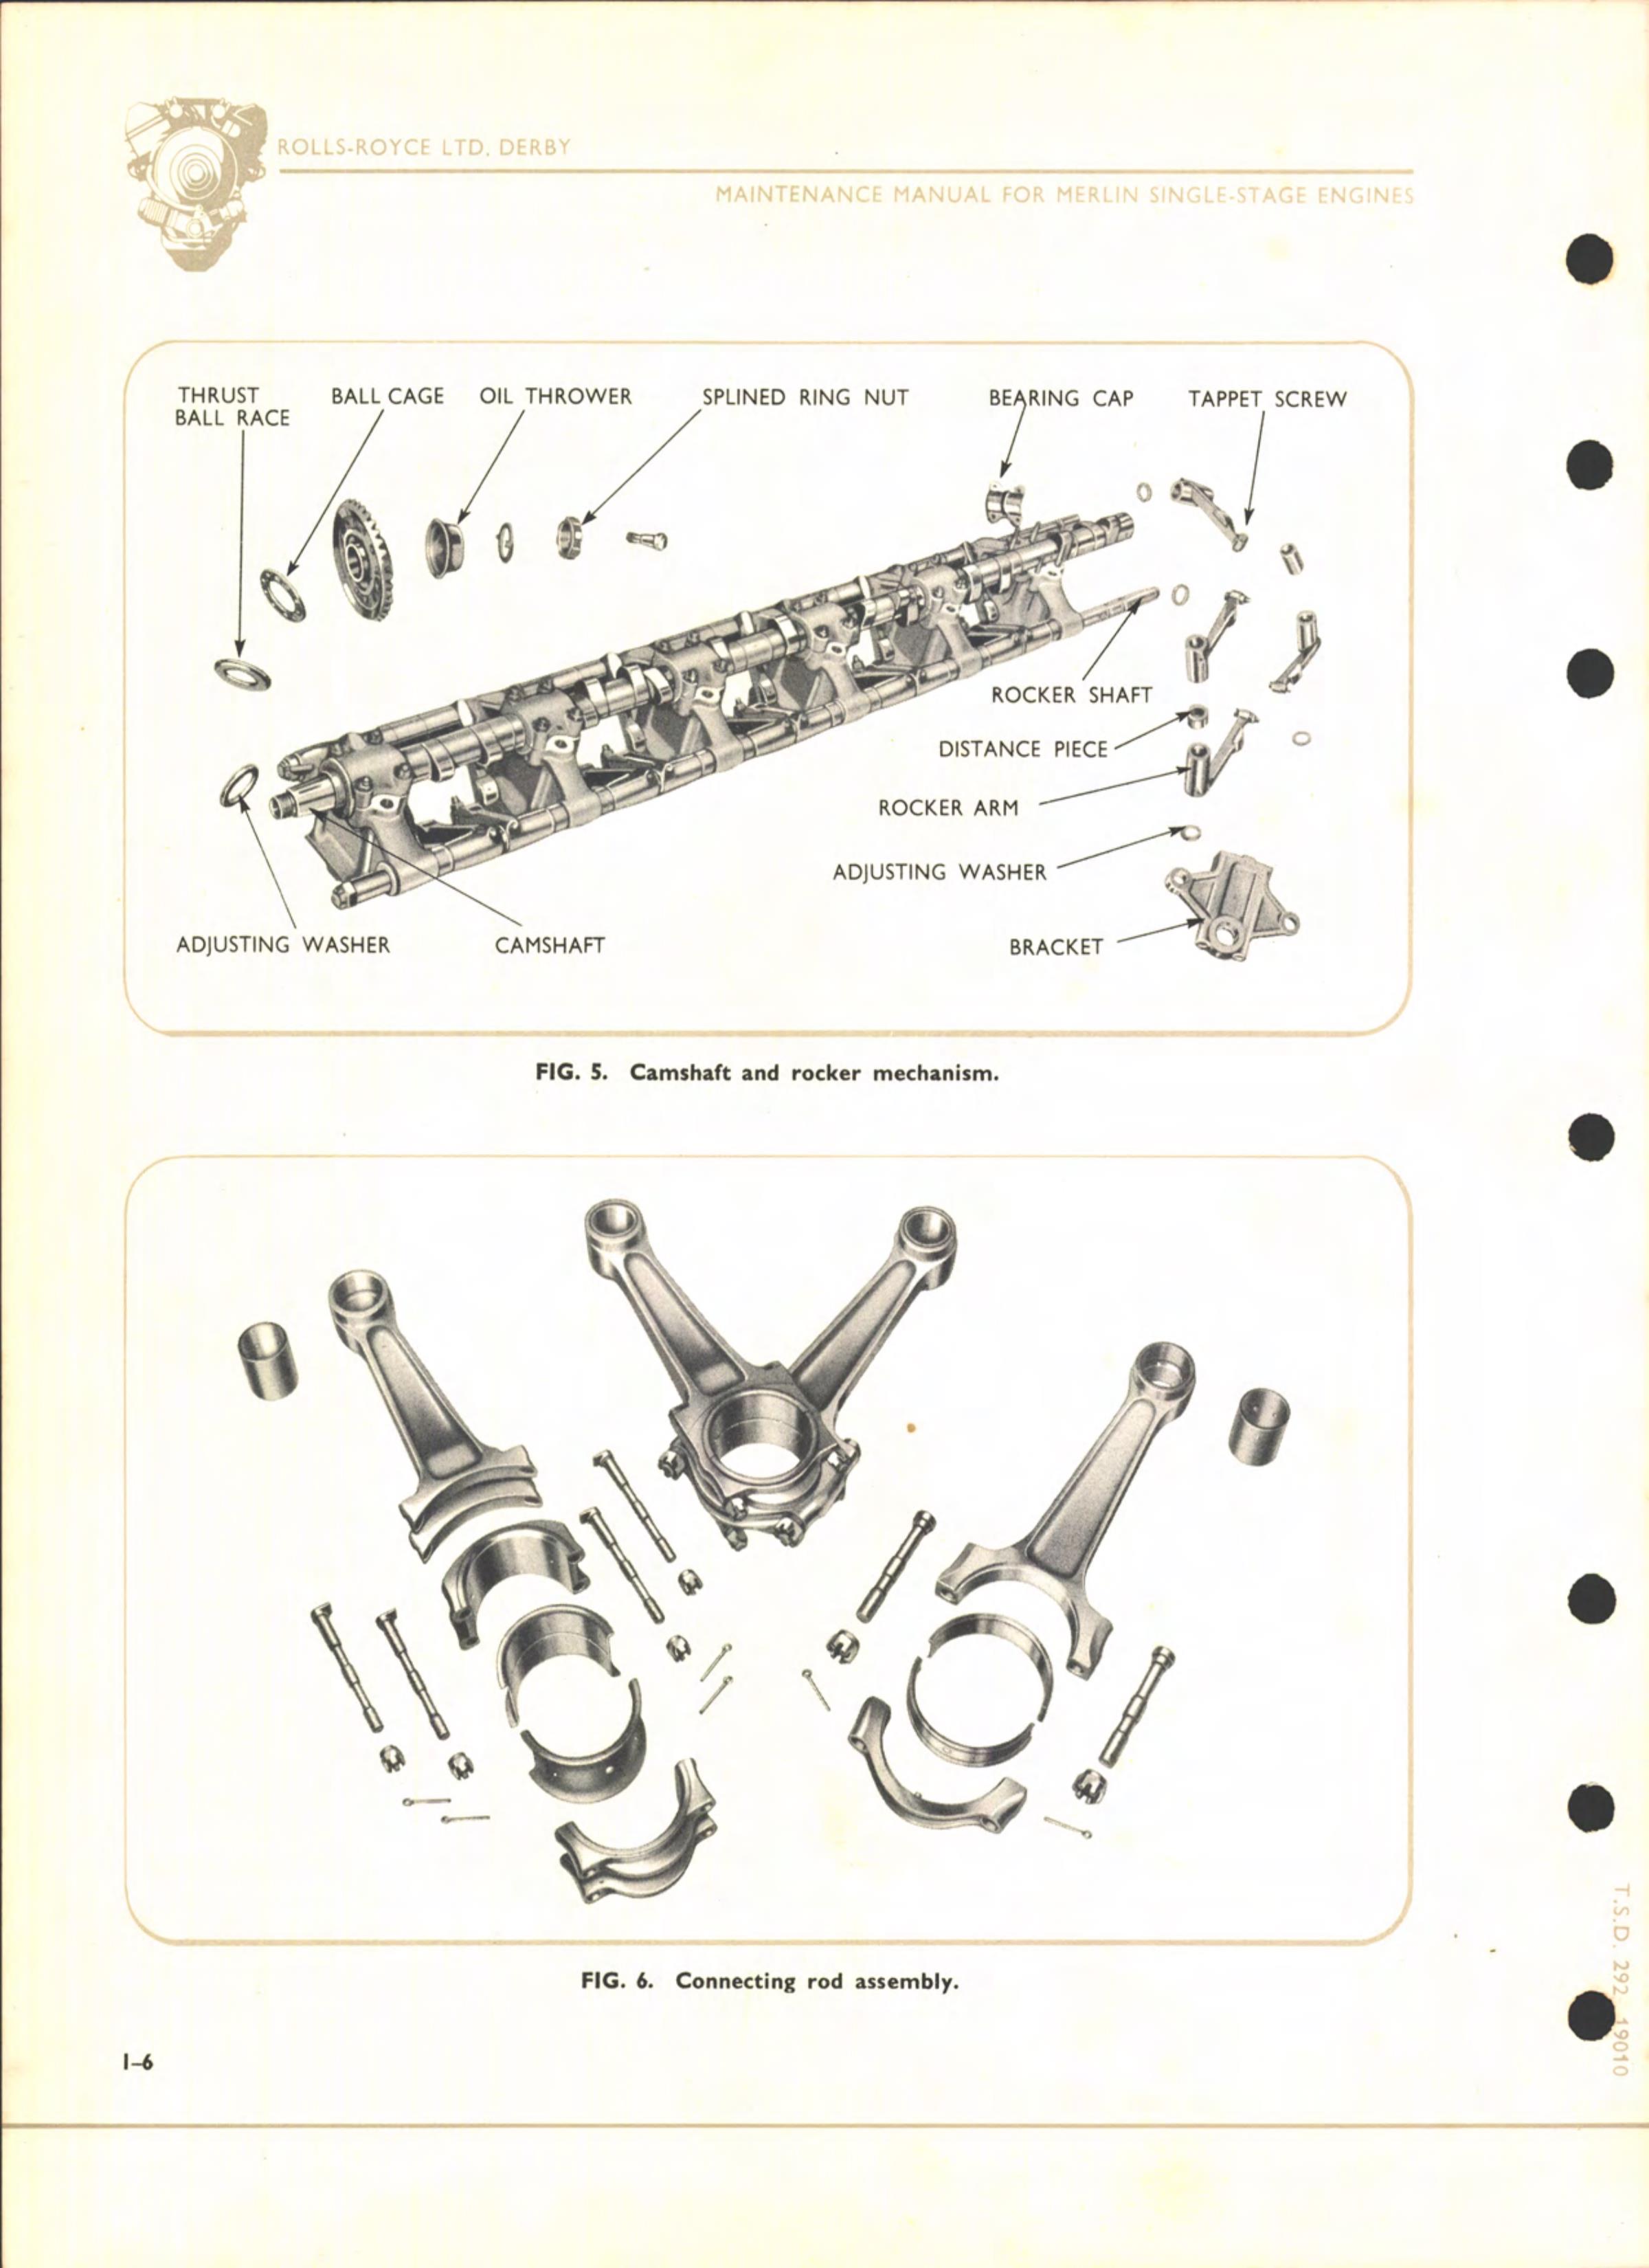 Sample page 24 from AirCorps Library document: Maintenance Manual for Single Stage Merlin Engines